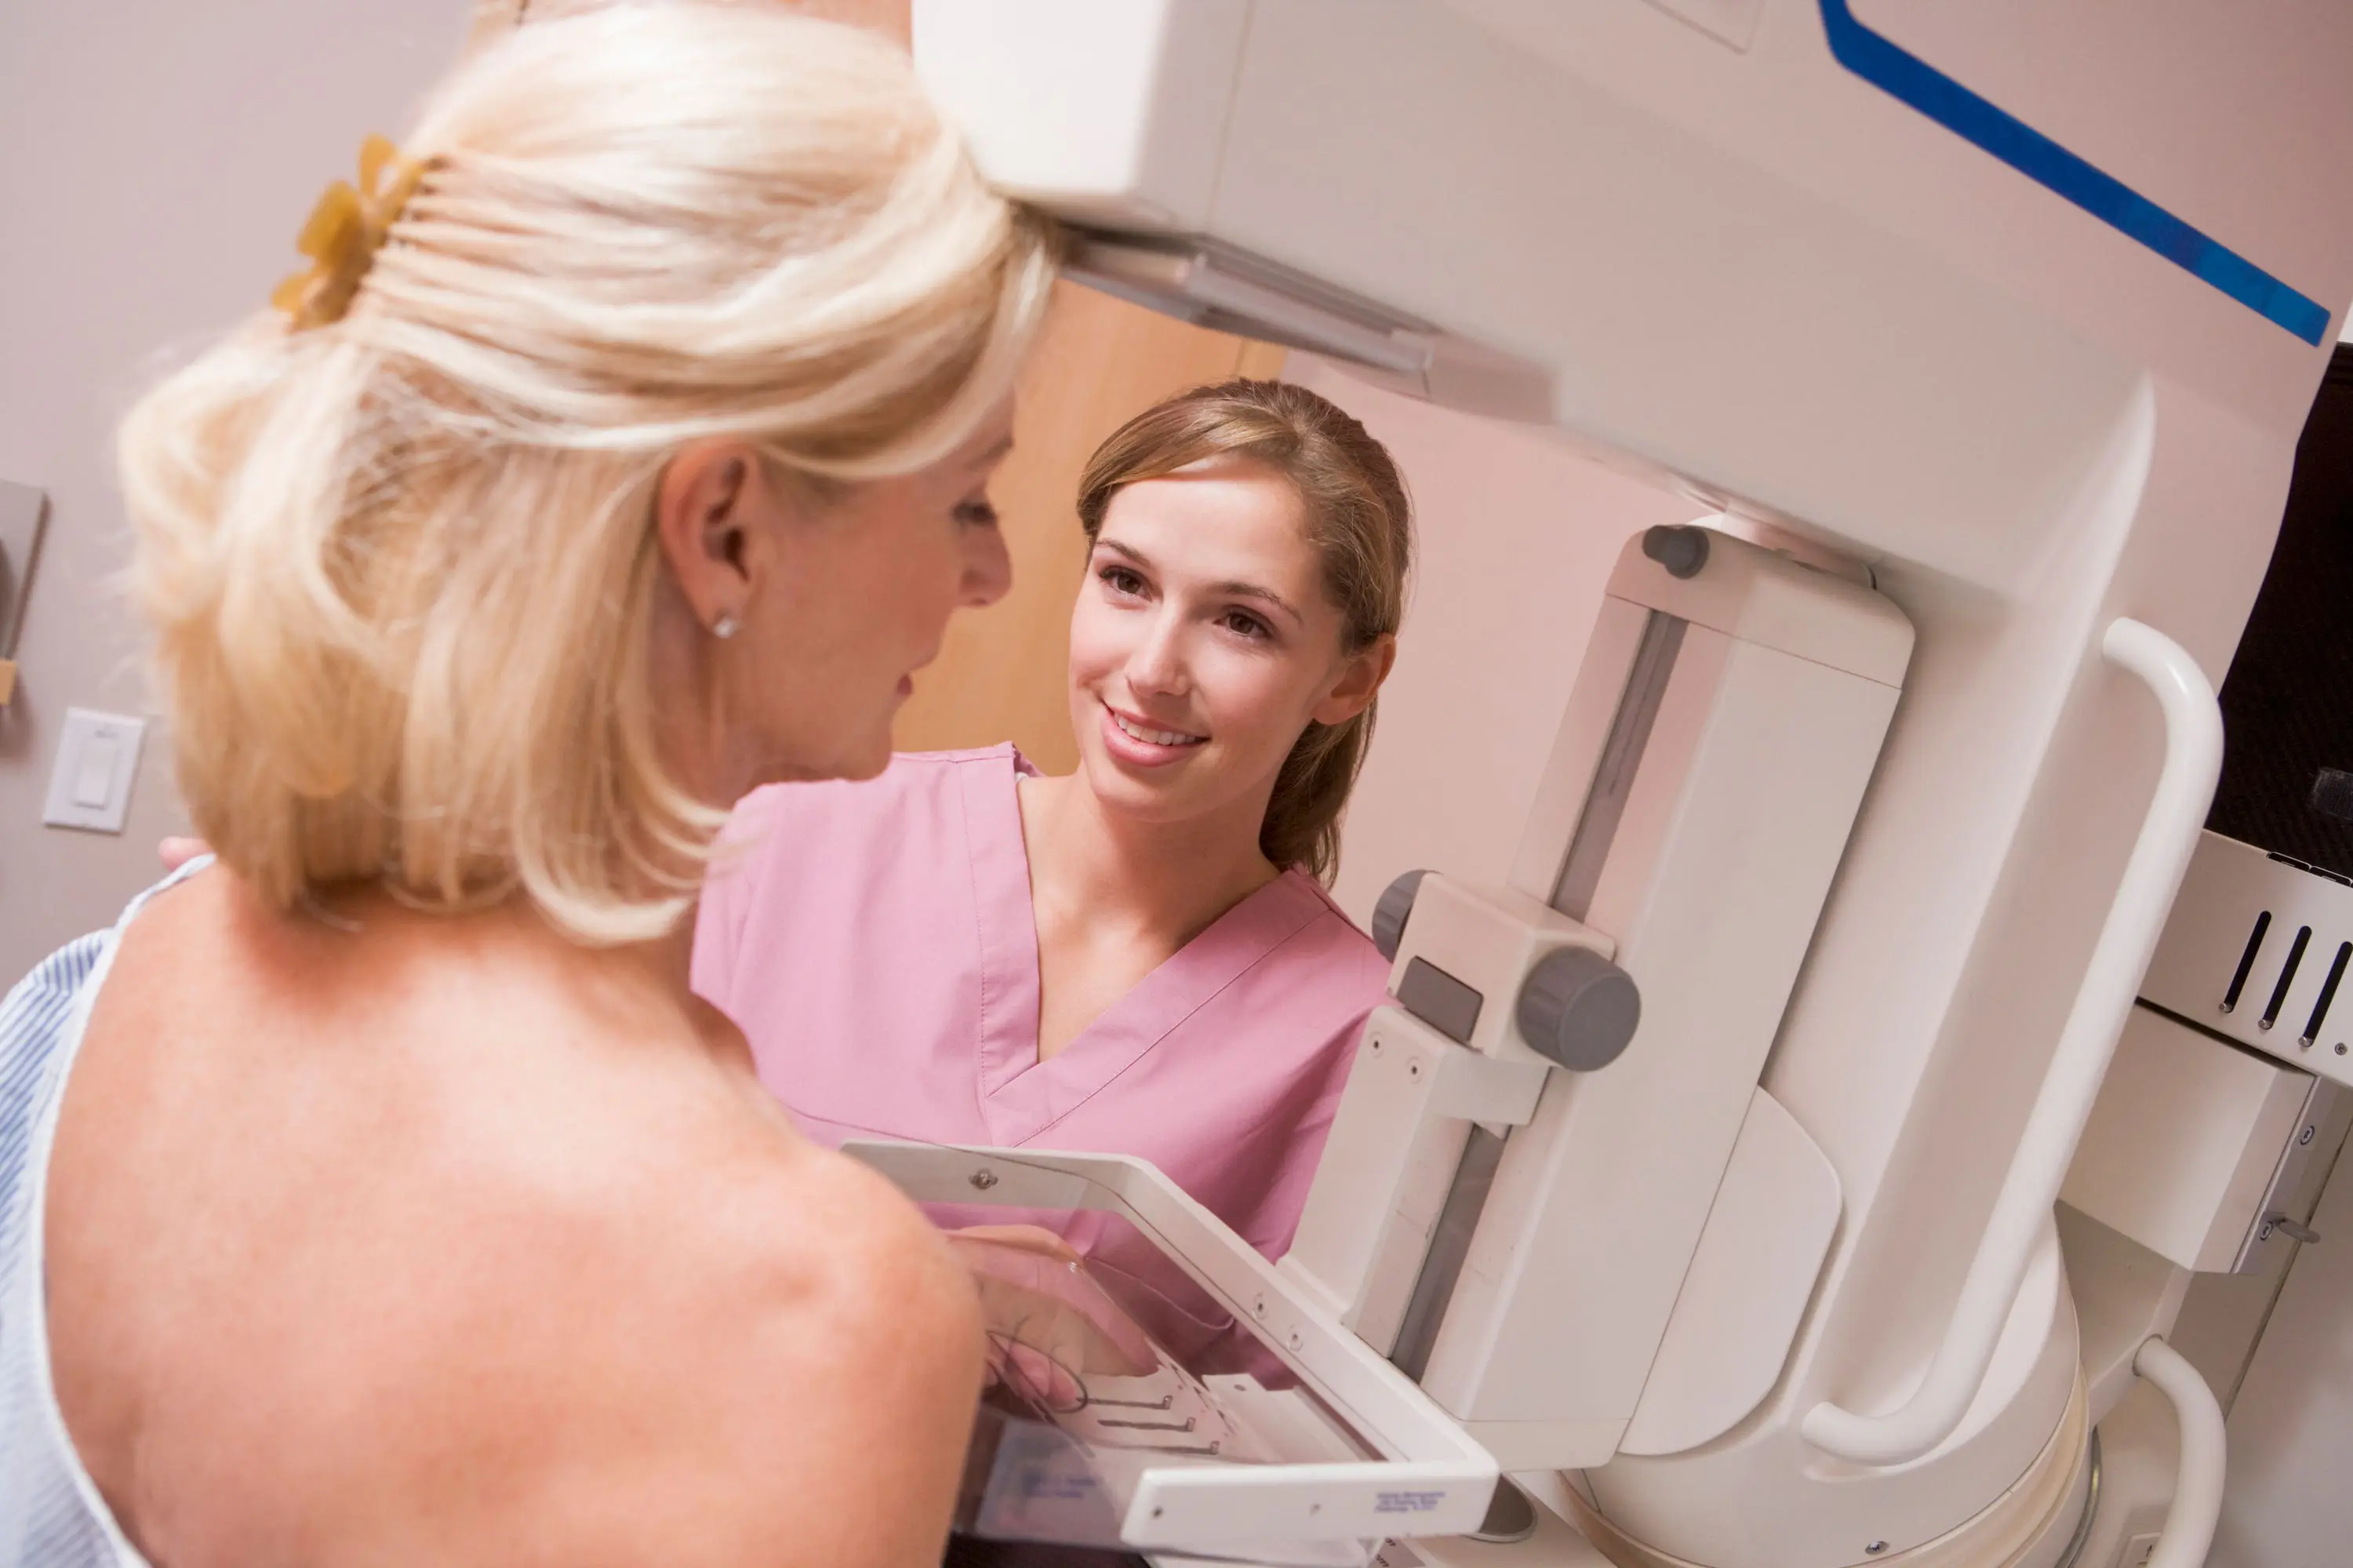 Woman attends breast cancer screening scaled